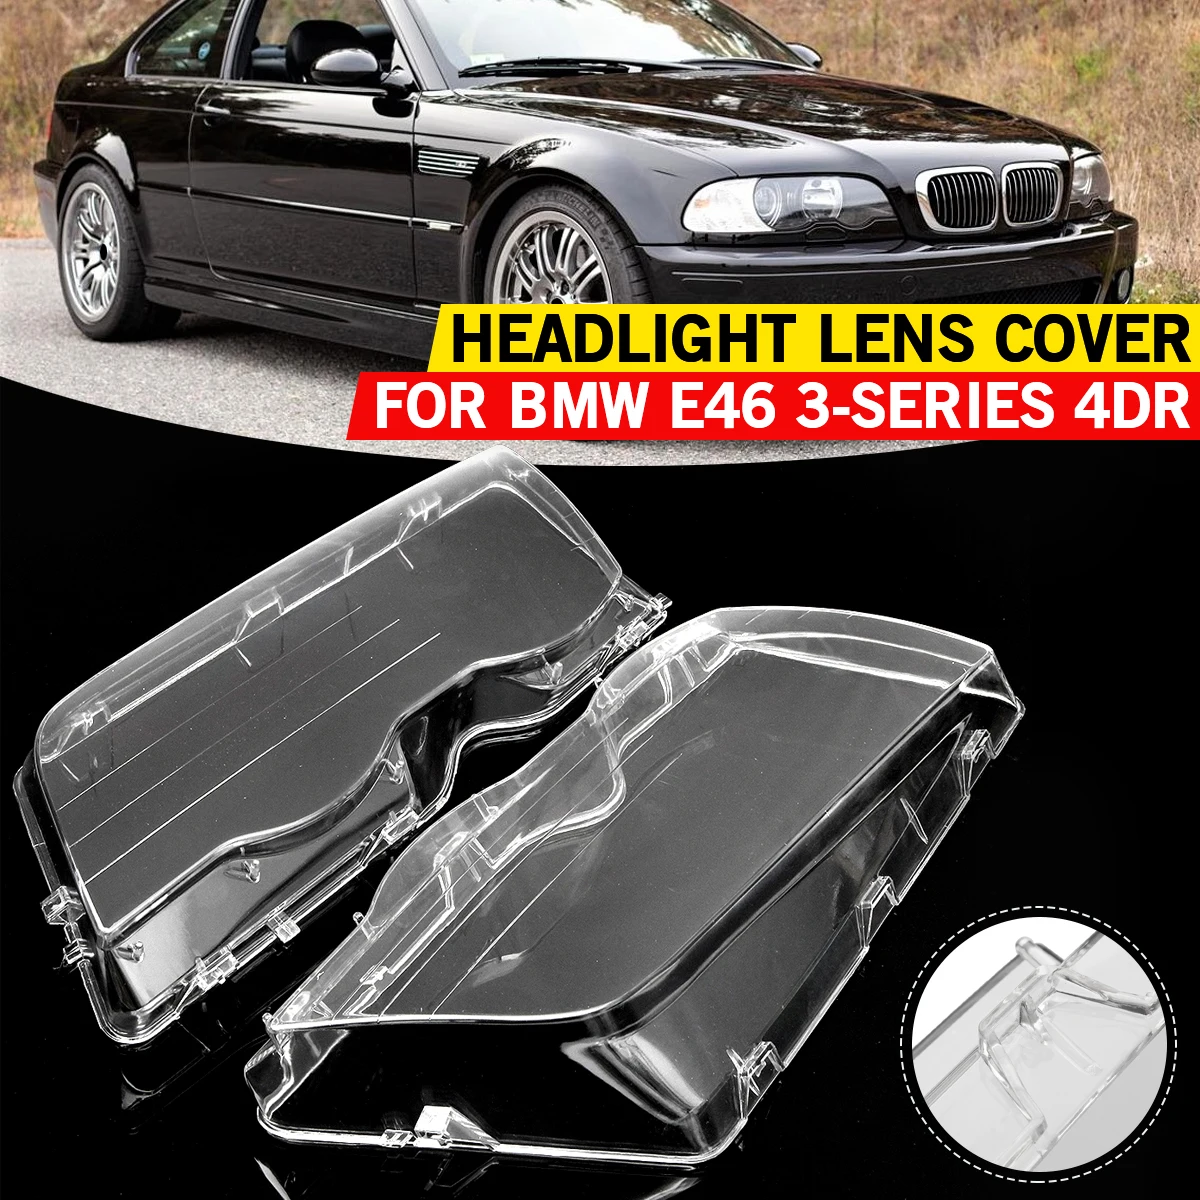 

Car Headlight Glass Cover Clear 4 Door Automobile Headlamp Head Light Lens Covers Styling For BMW E46 4DR 3-Series 1998-2001